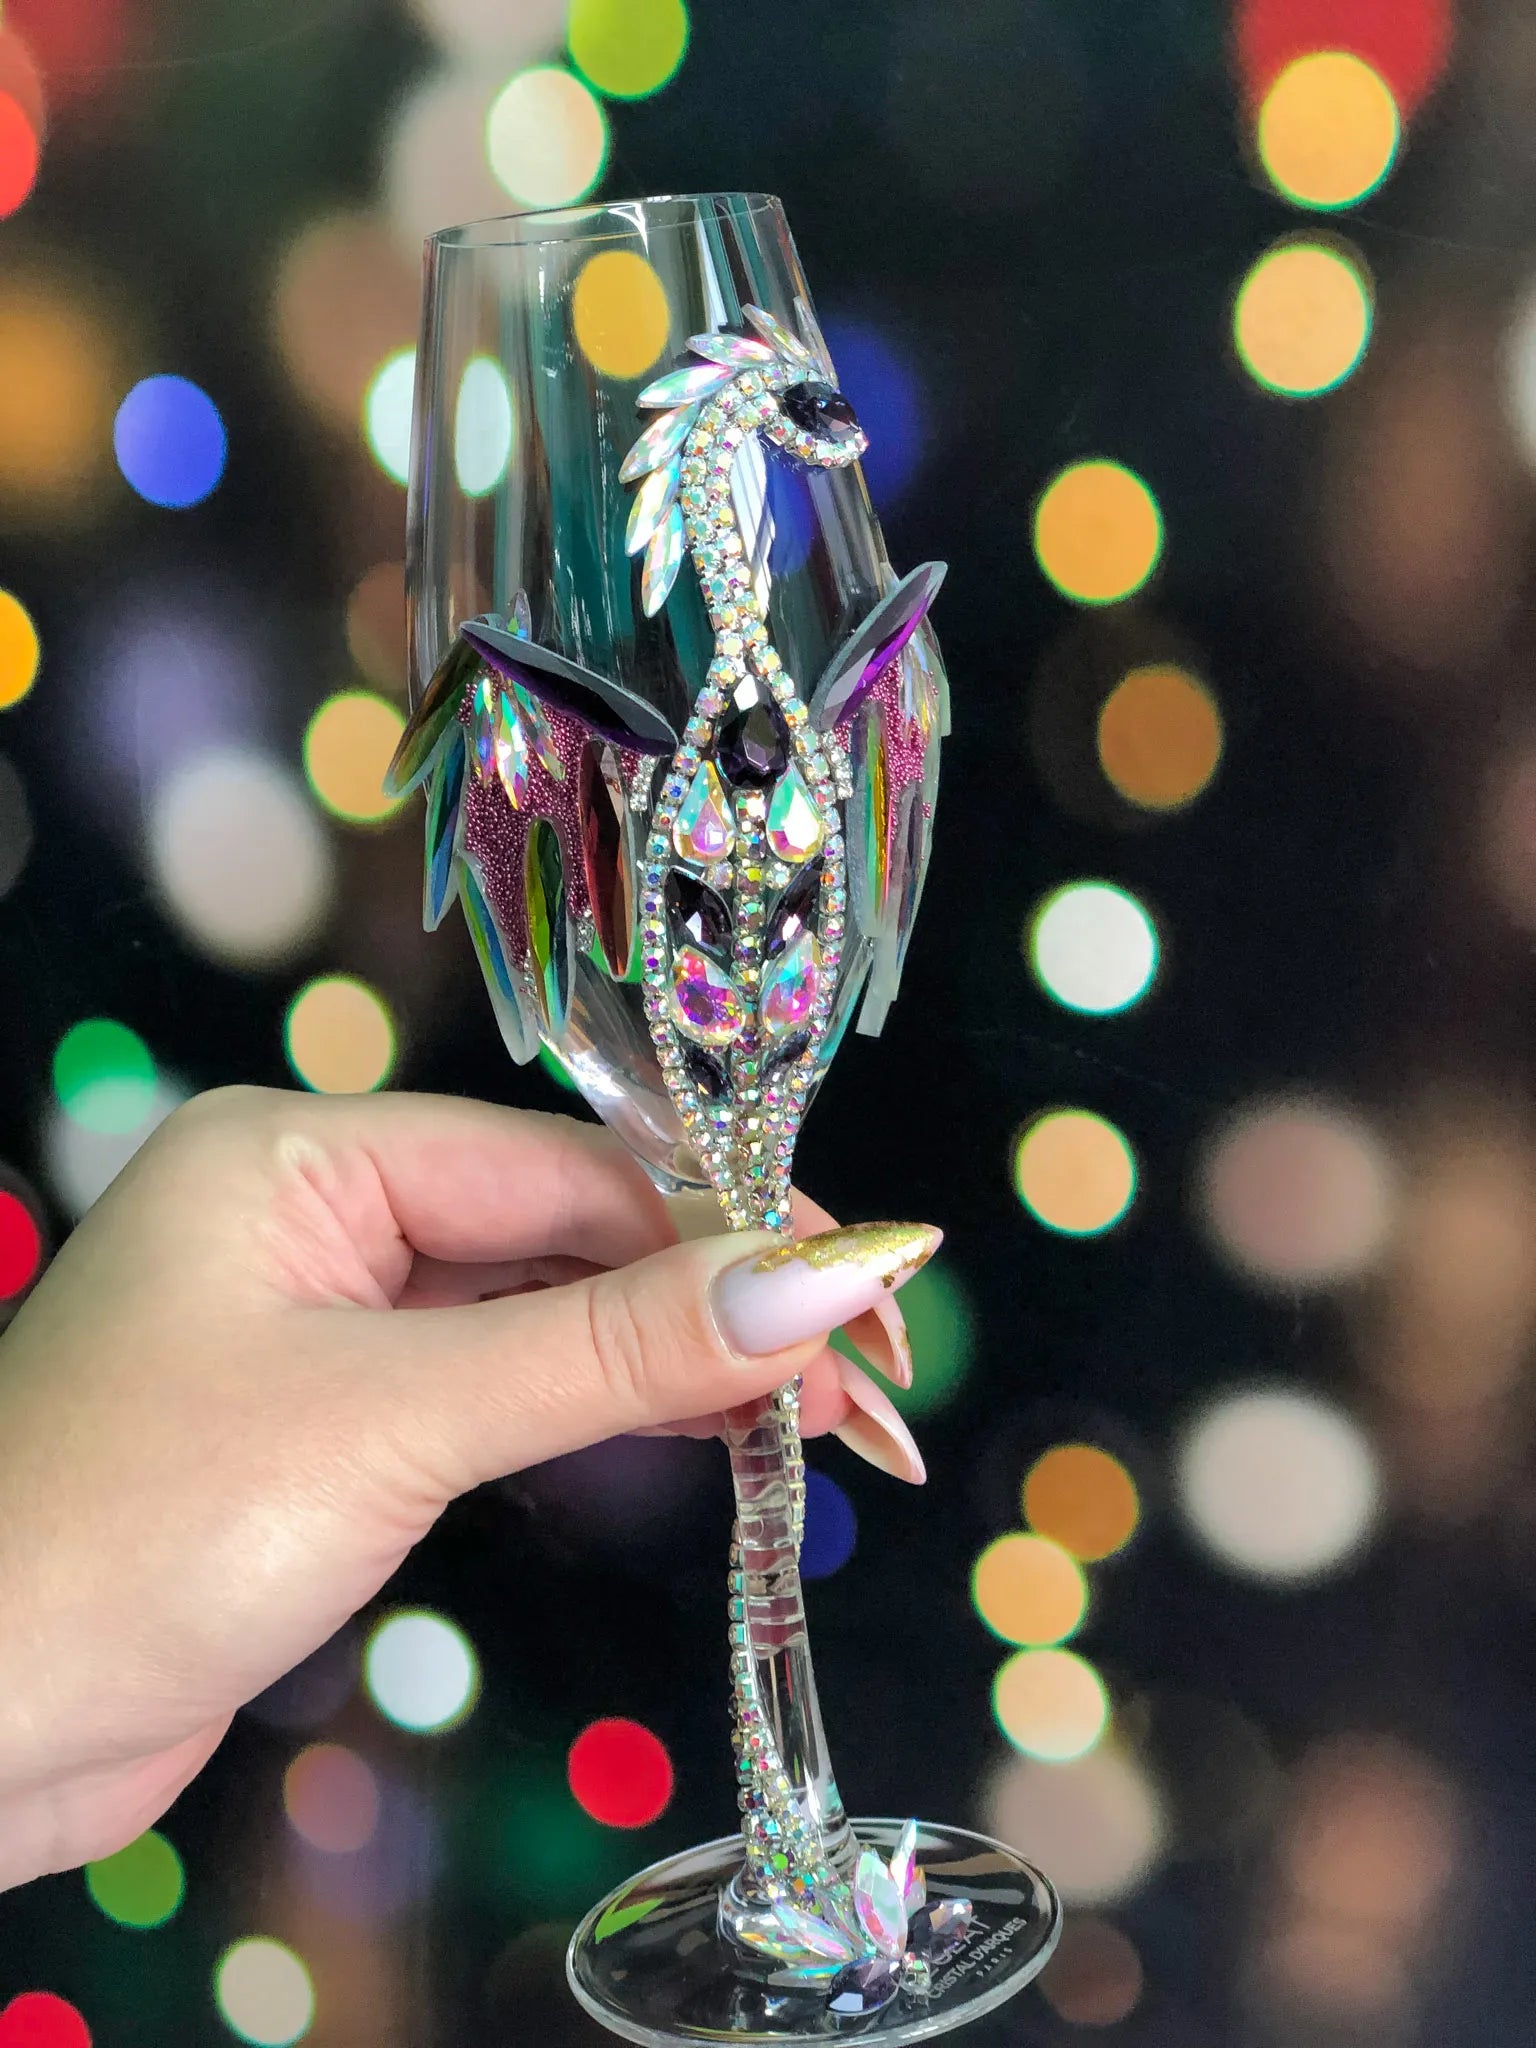 Glittering dragon-encrusted wineglass with multifaceted crystals capturing a dance of colorful city lights in the background